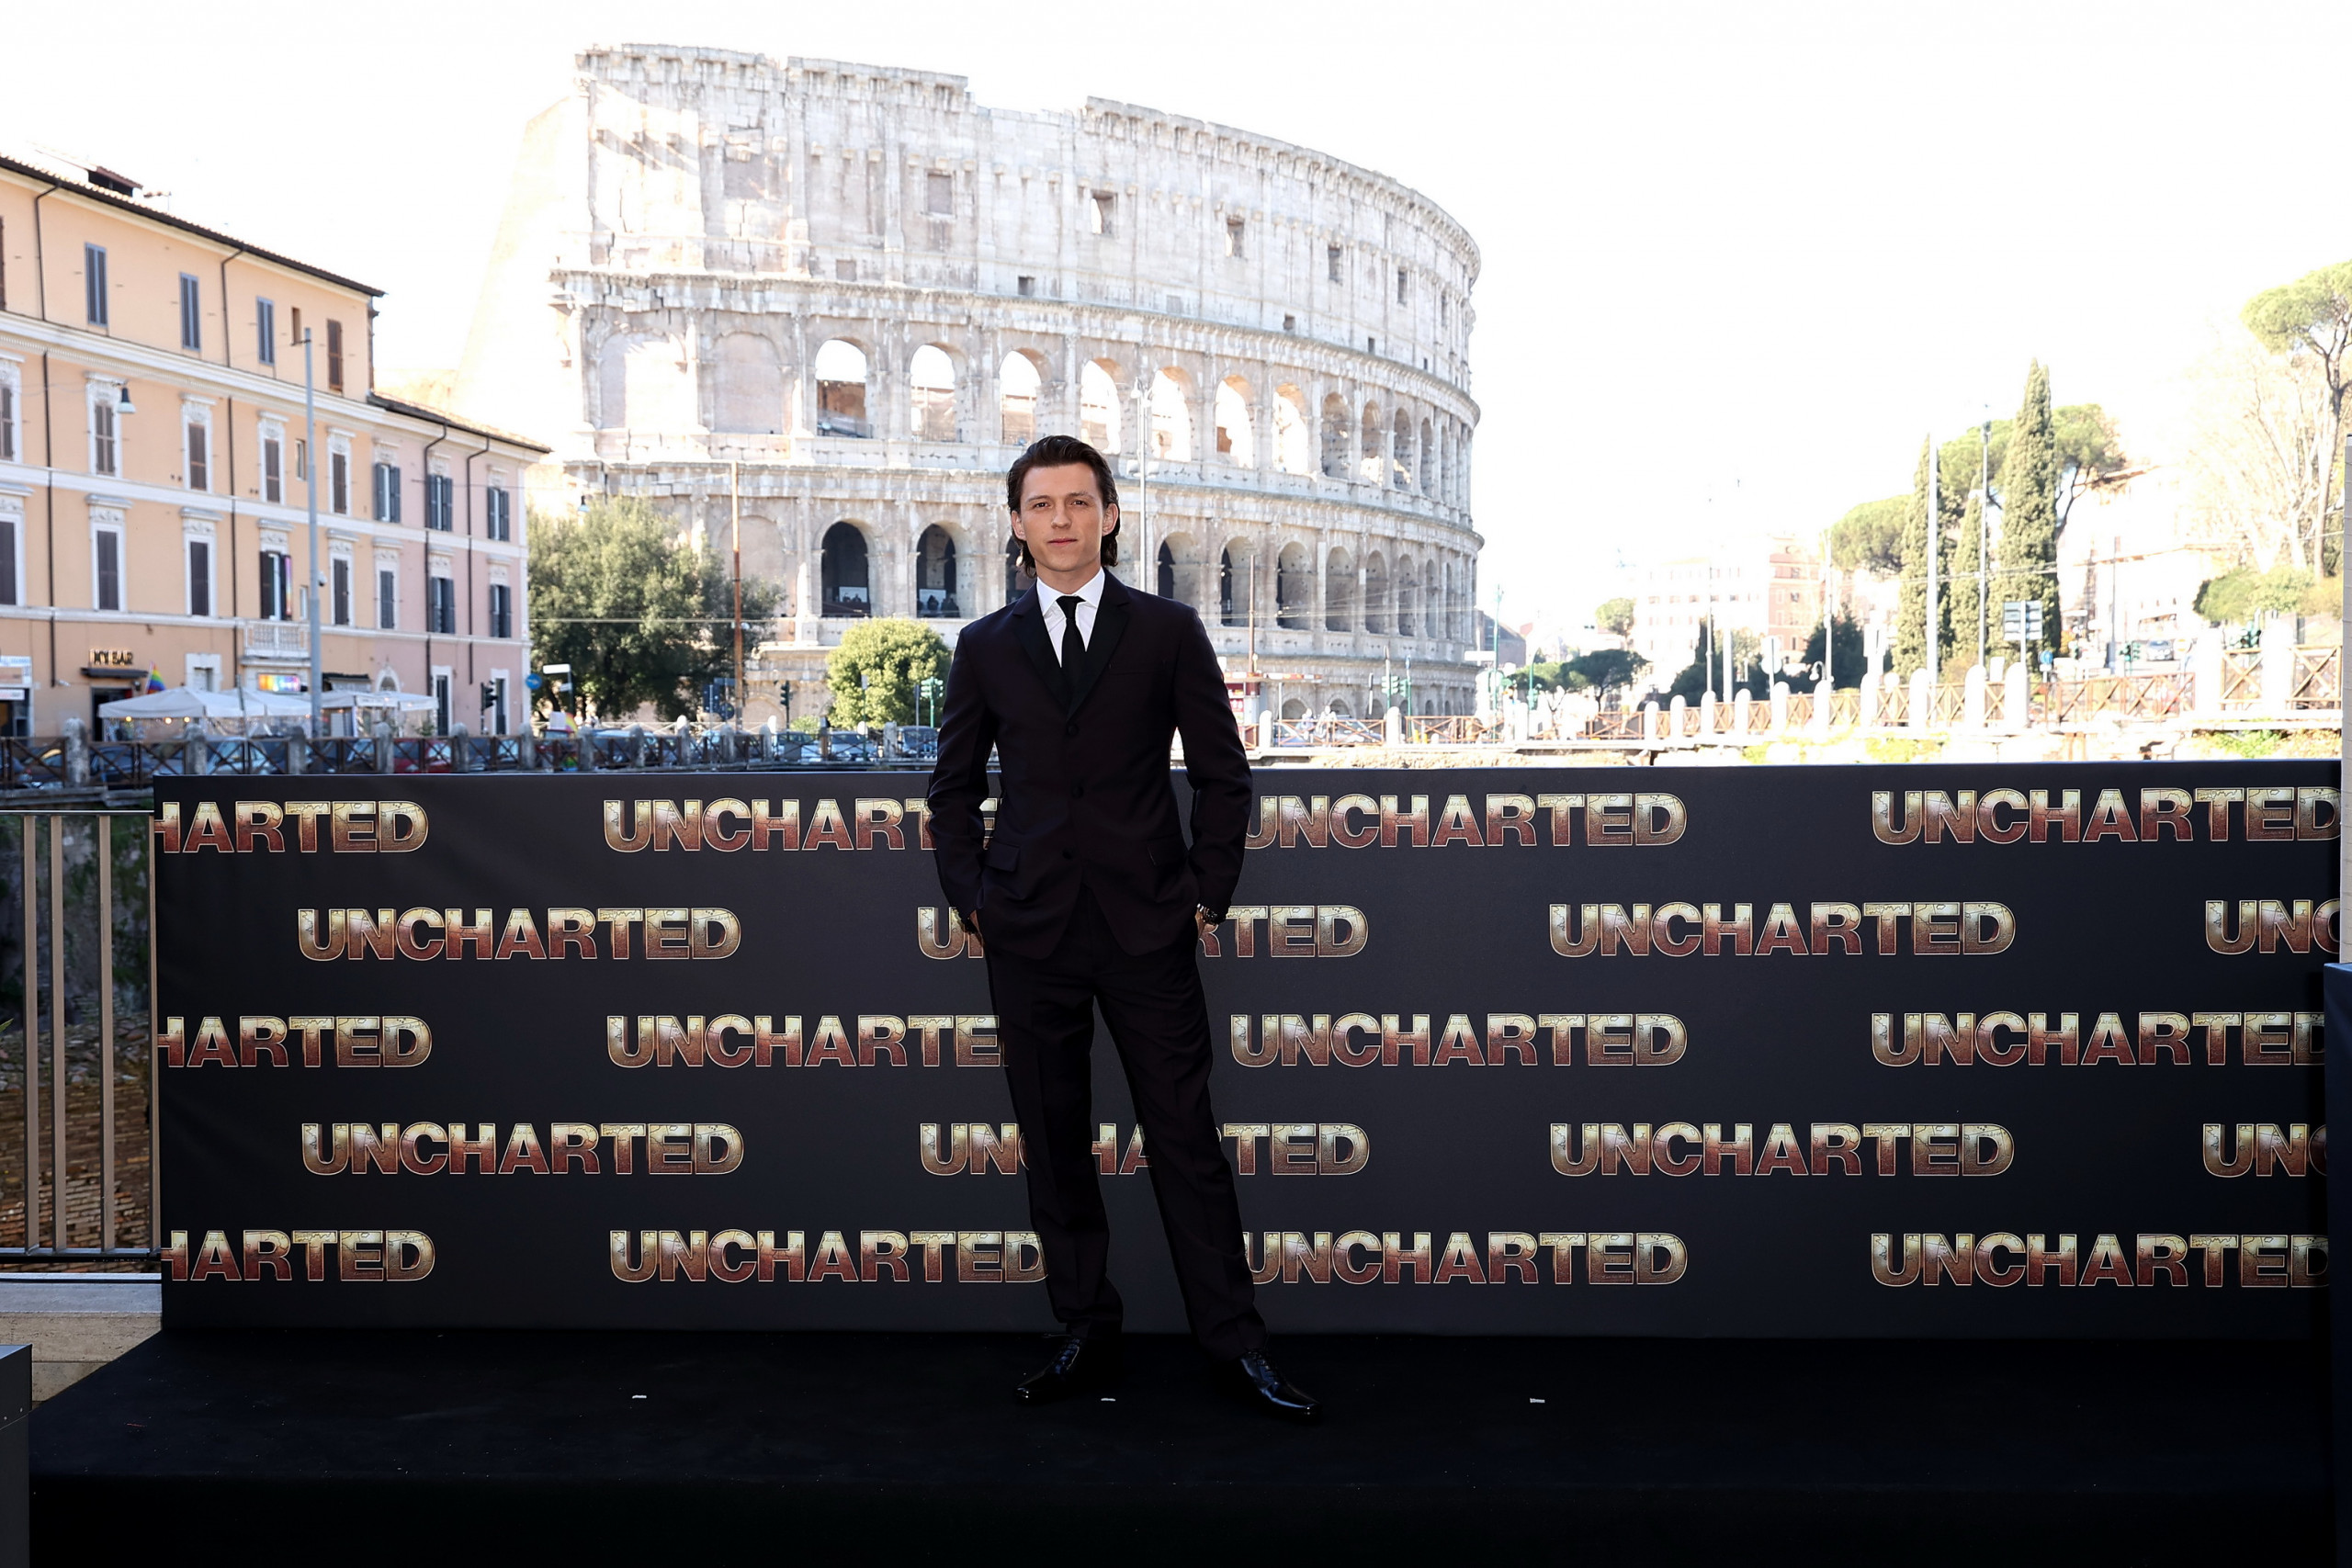 ROME, ITALY - FEBRUARY 09: Tom Holland attends the photocall of the movie "Uncharted" at Palazzo Manfredi on February 09, 2022 in Rome, Italy. (Photo by Ernesto Ruscio/Getty Images)